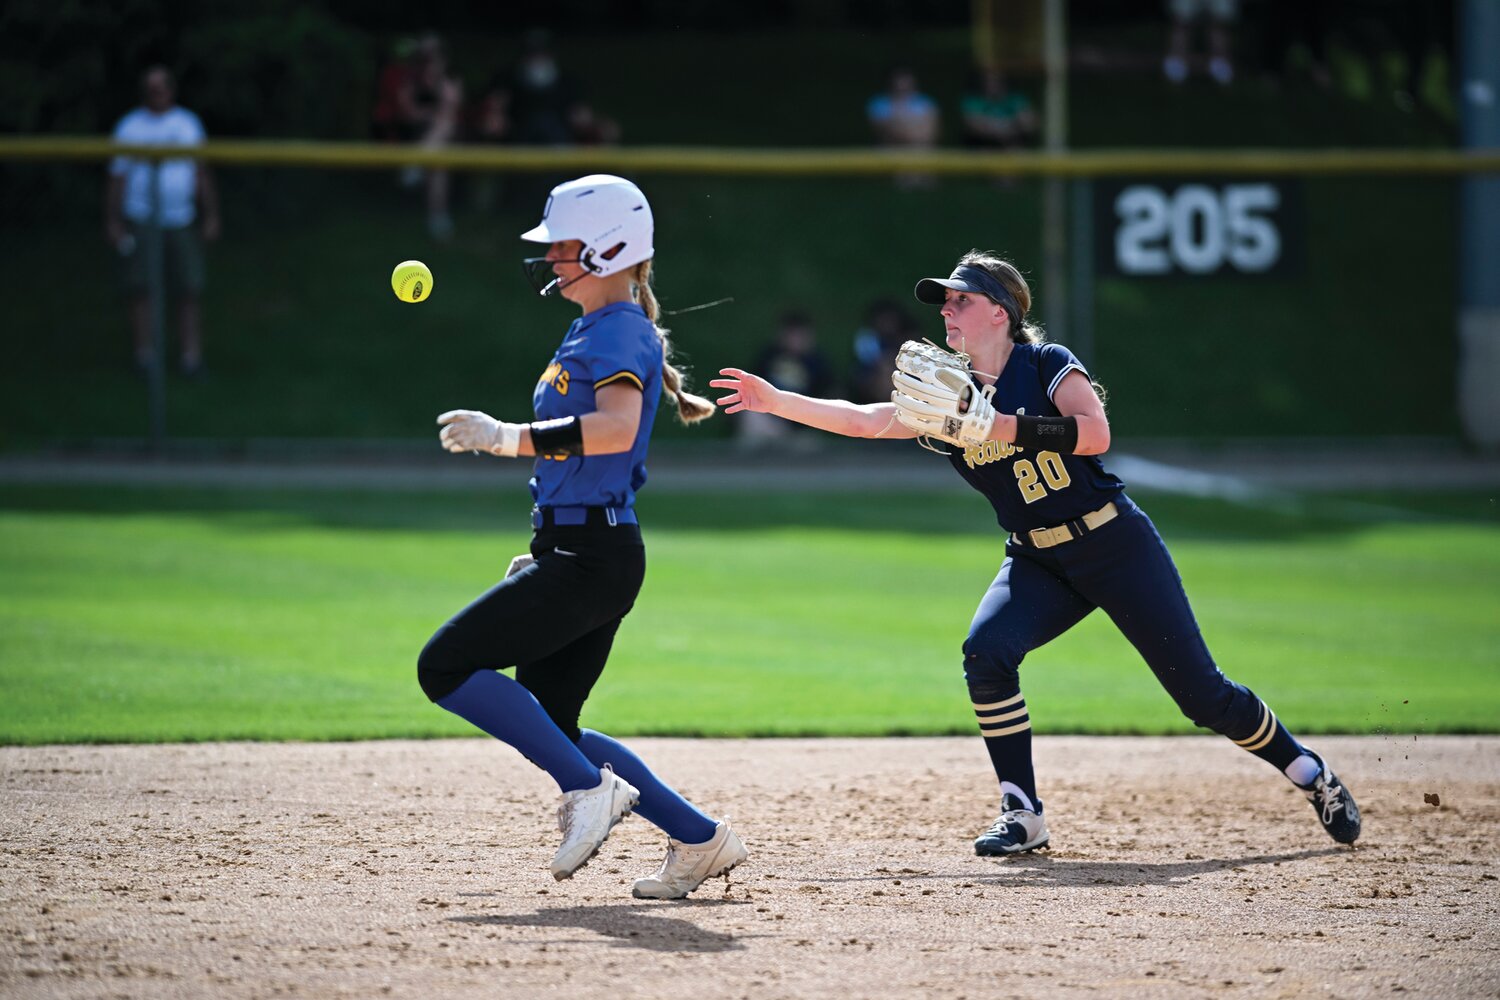 Council Rock South second baseman Kelly Delise flips the ball ahead of Downingtown East baserunner Jade Jenkins in the fourth inning.